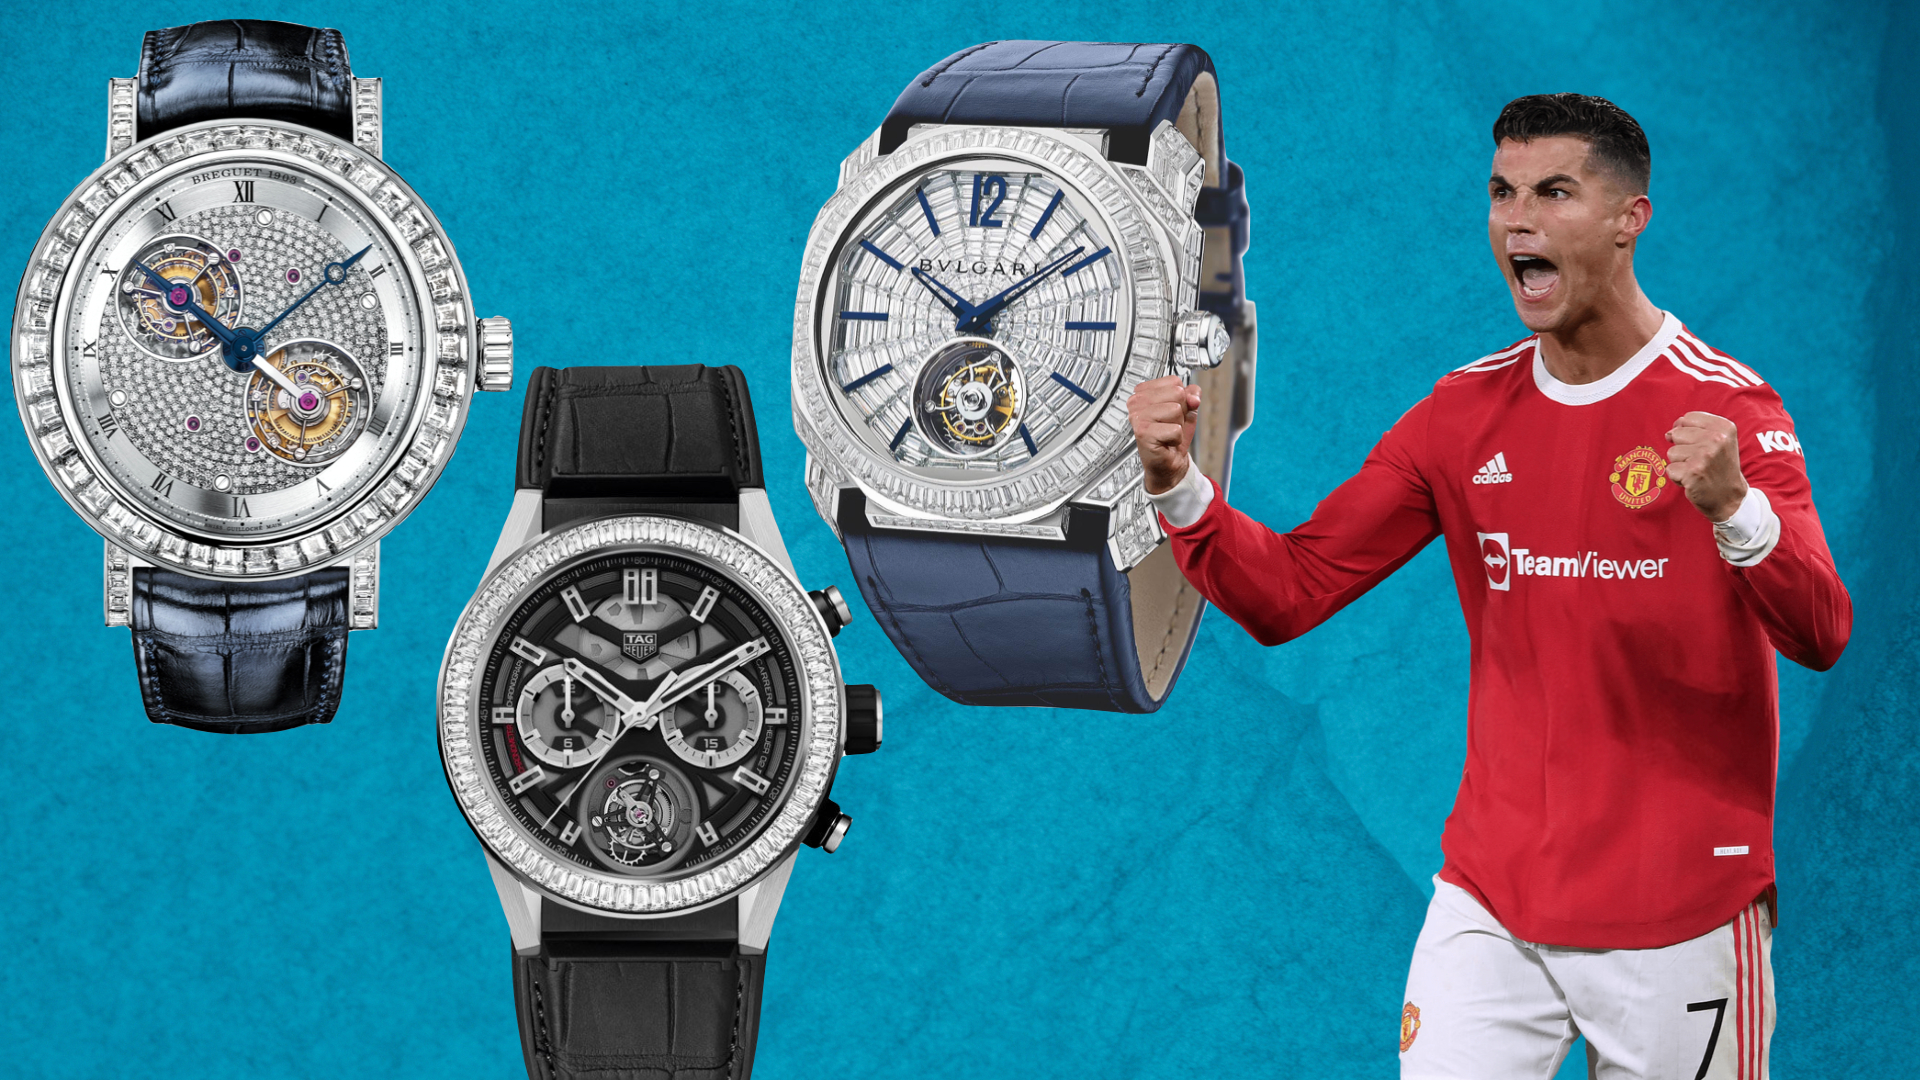 Cristiano Ronaldo's watch collection kicks all others out of the